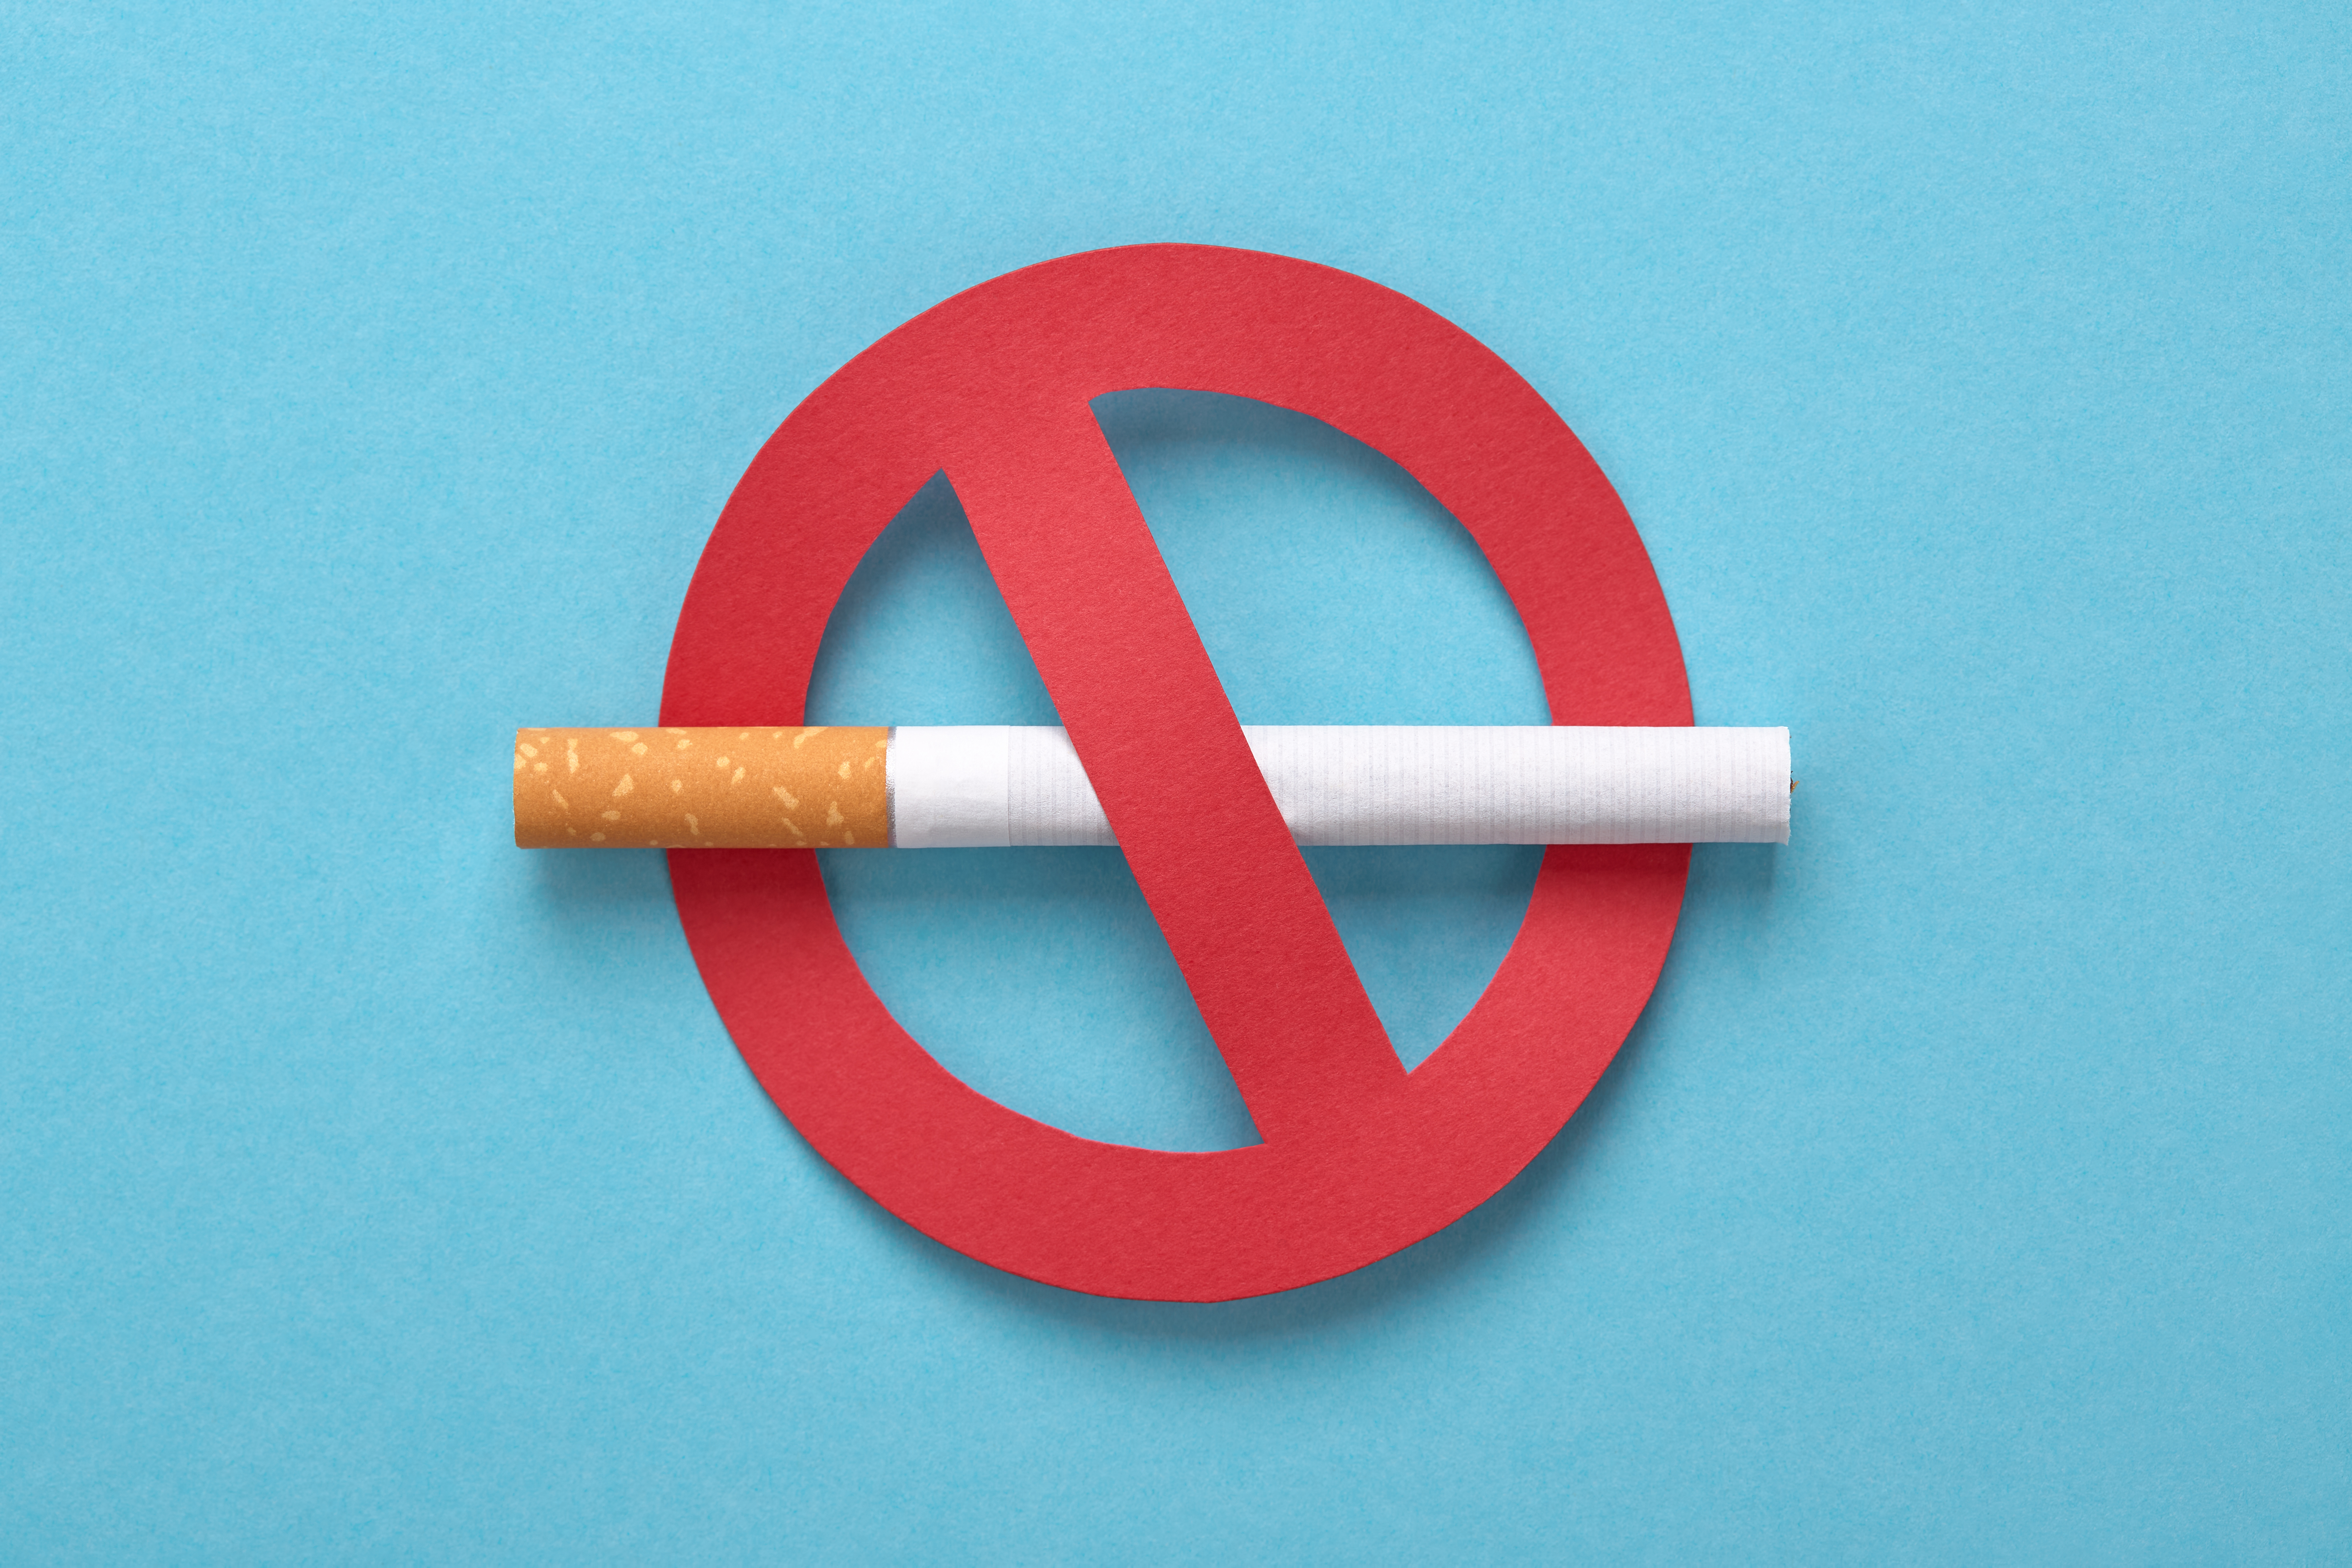 A photo of a real-life cigarette inside a red ban circular symbol